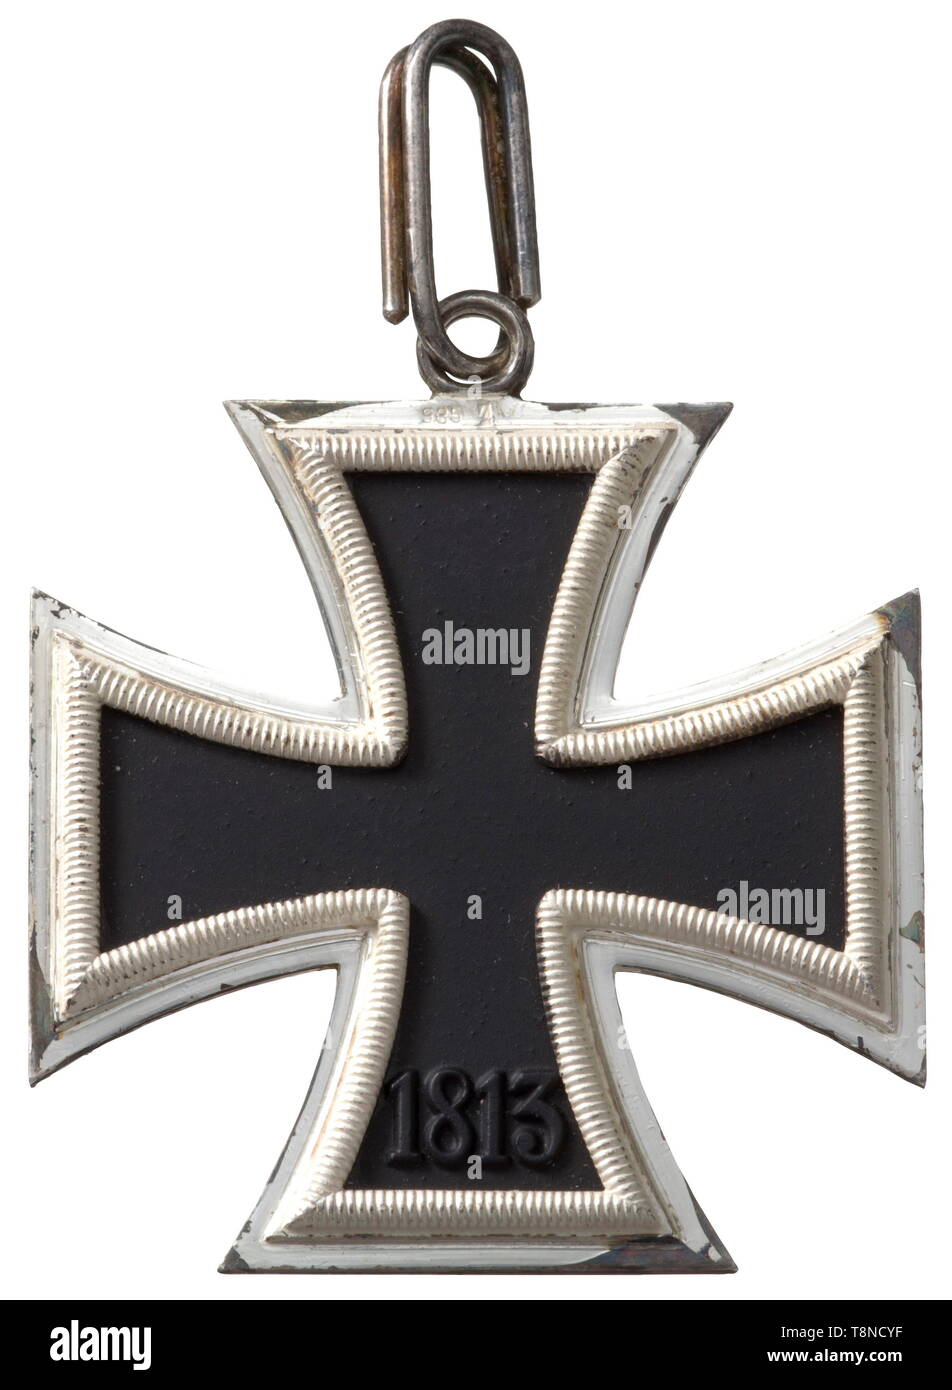 Knight's Cross of the Iron Cross by the firm Steinhauer & Lück '4' A never used cross in '935' silver and iron, late world war issue of this Lüdenscheid manufacturer. The silver frame retains the original frosting with minimal oxidation at the corners. The suspension ring likewise bears a silver fineness punchmark and the accompanying original section of Knight's Cross ribbon is not shortened and 74 cm in length. According to the consignor, this cross is not from the Klessheim Castle hoard, but rather is a posthumously awarded example. Width 48.2 mm. Weight 29.5 g. historic, Editorial-Use-Only Stock Photo